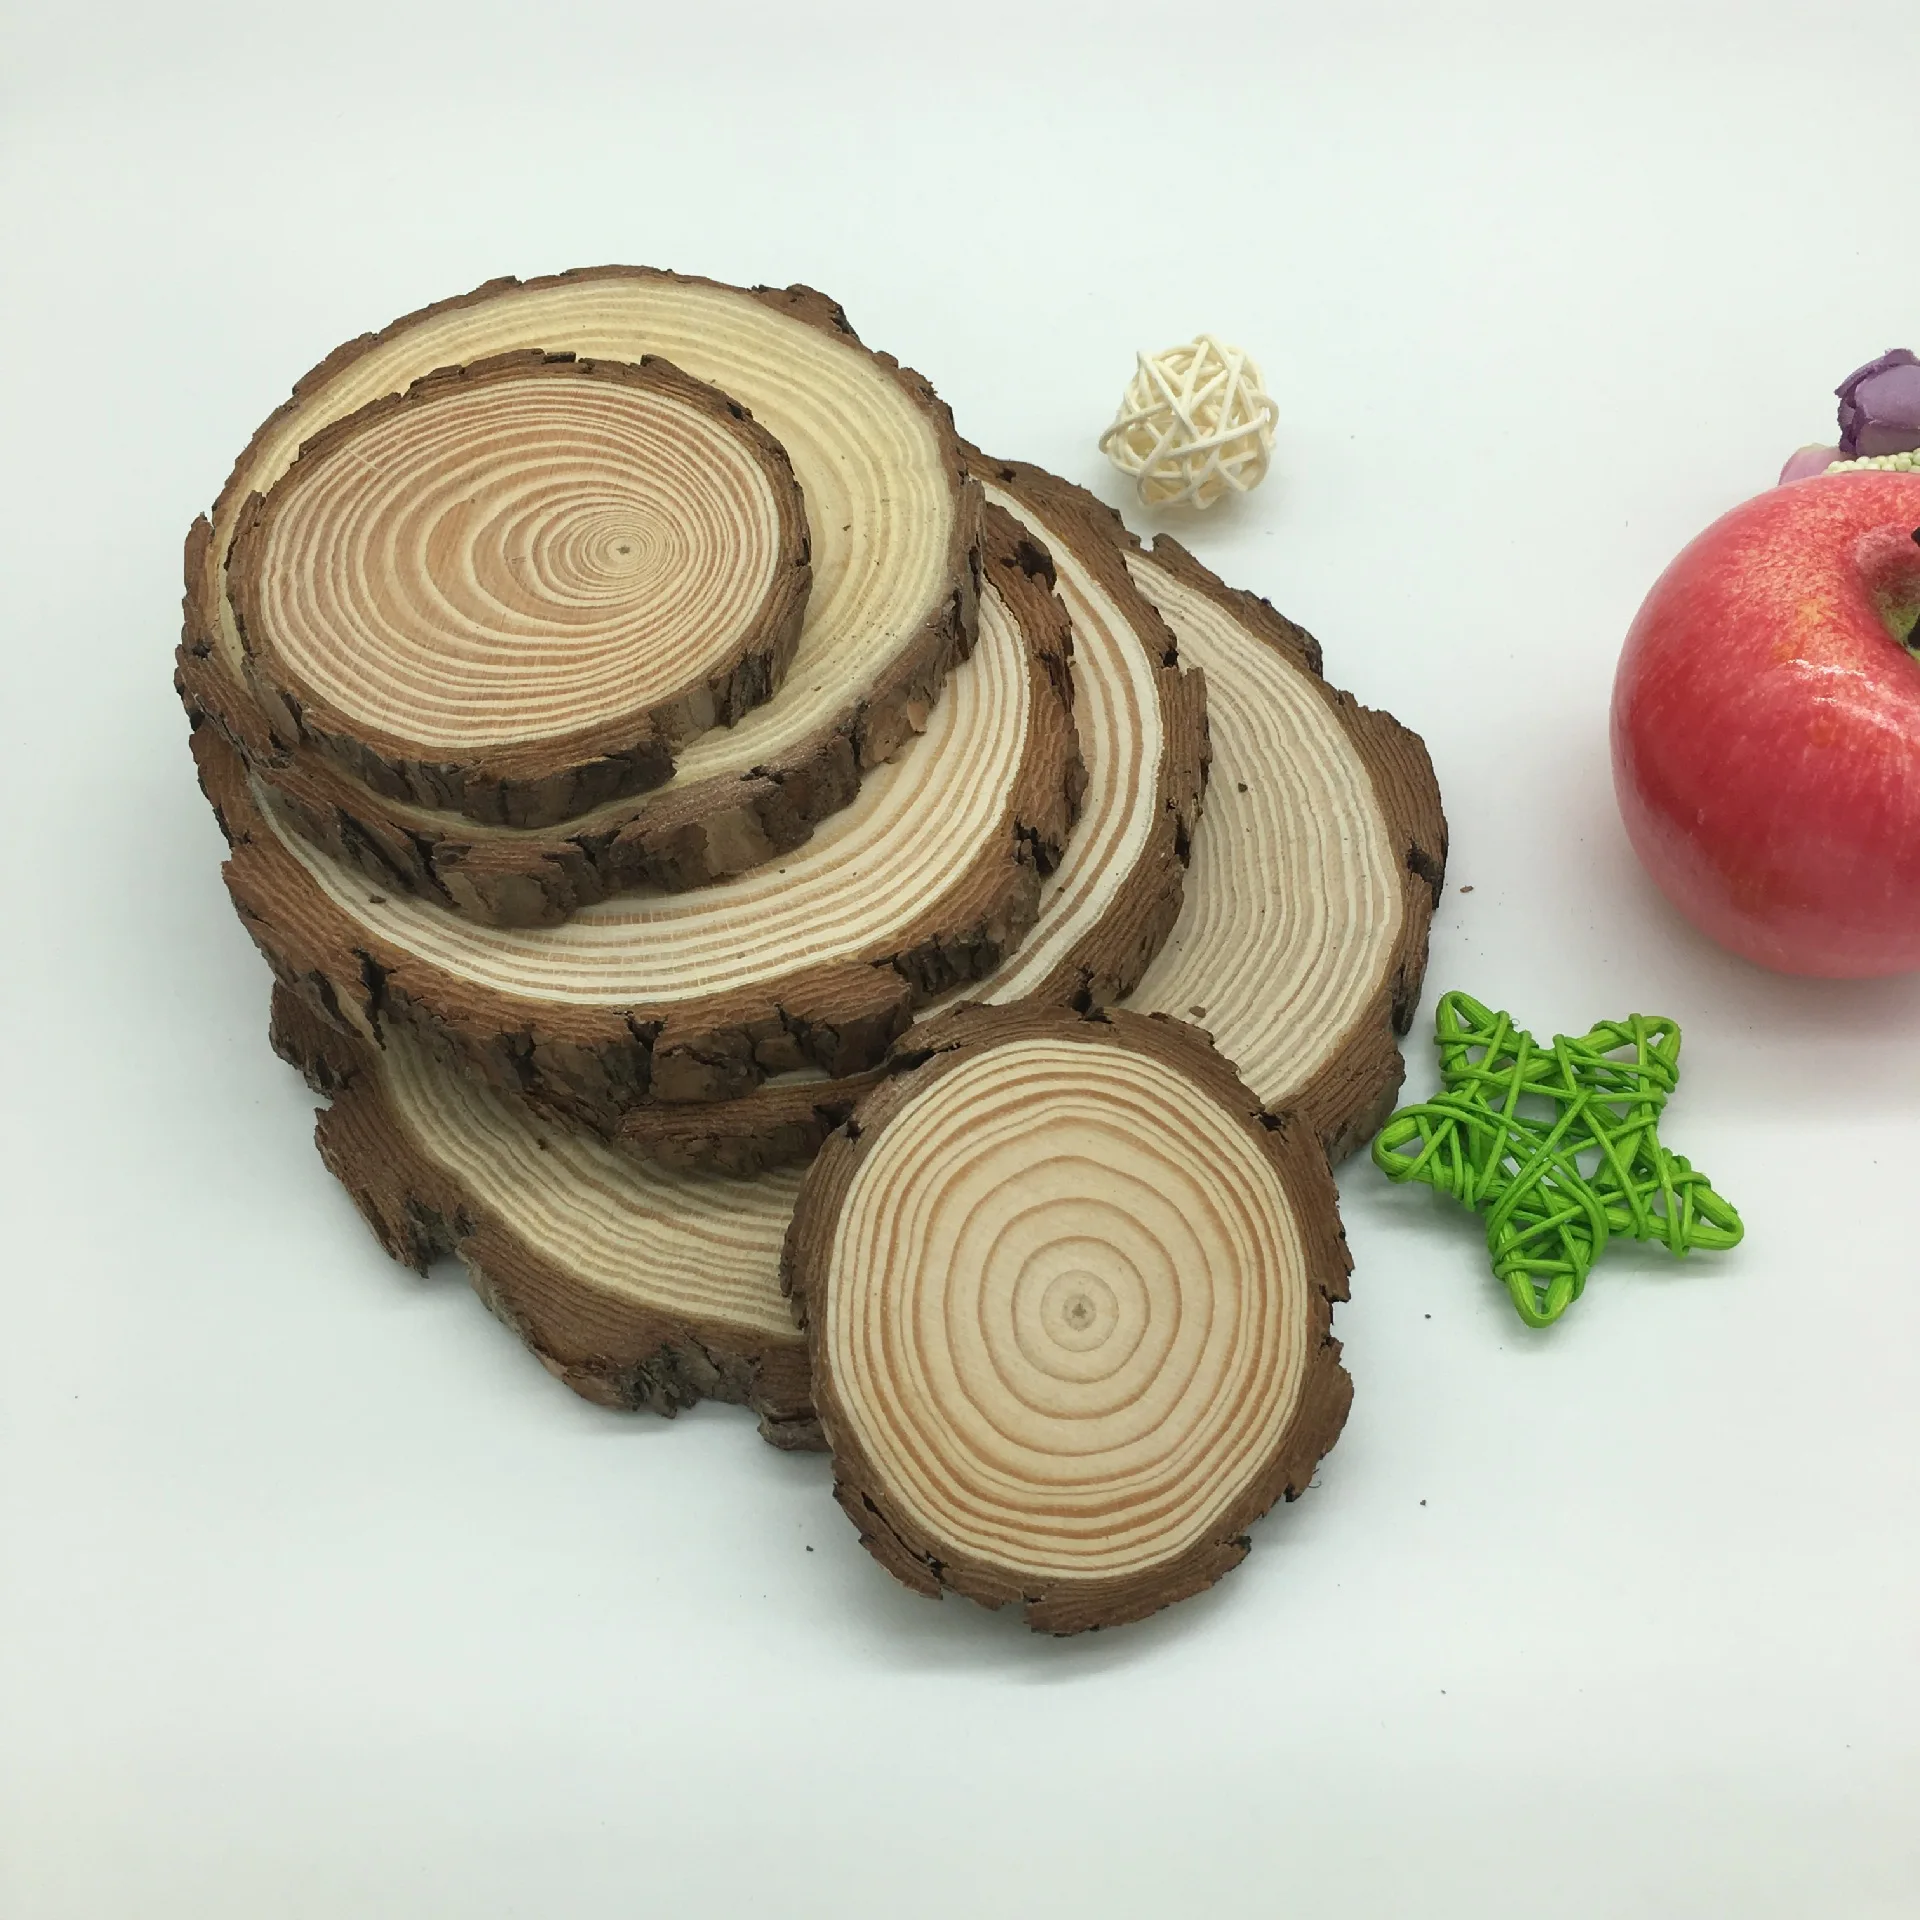 7-11.8inch Unfinished Natural Wood Slices with Tree Bark Round Pine Wood  for Rustic Wedding Centerpiece Disc Coaster Craft Decor - AliExpress